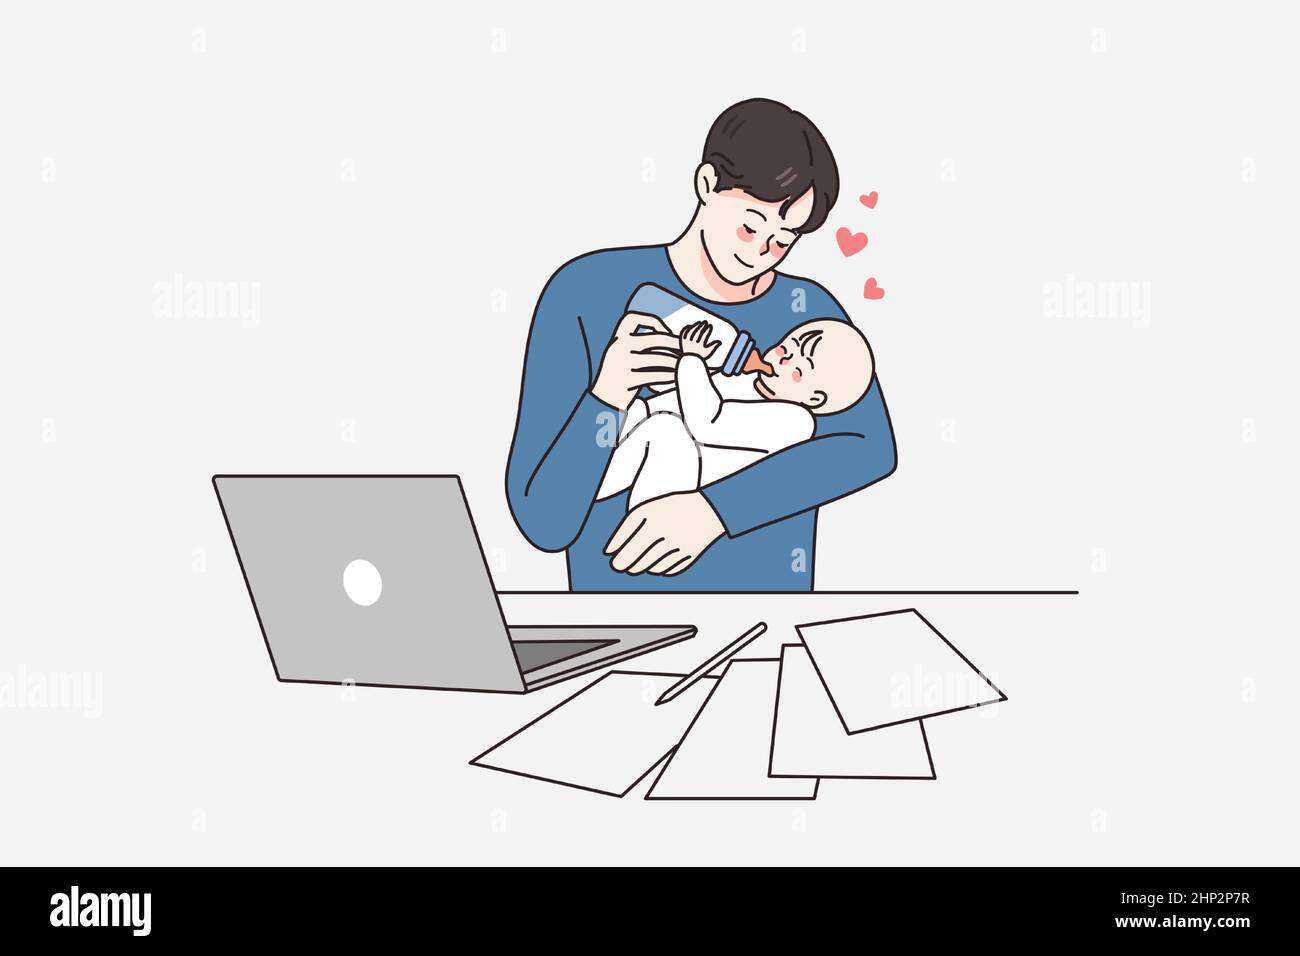 Happy parenthood and fatherhood concept. Stock Vector